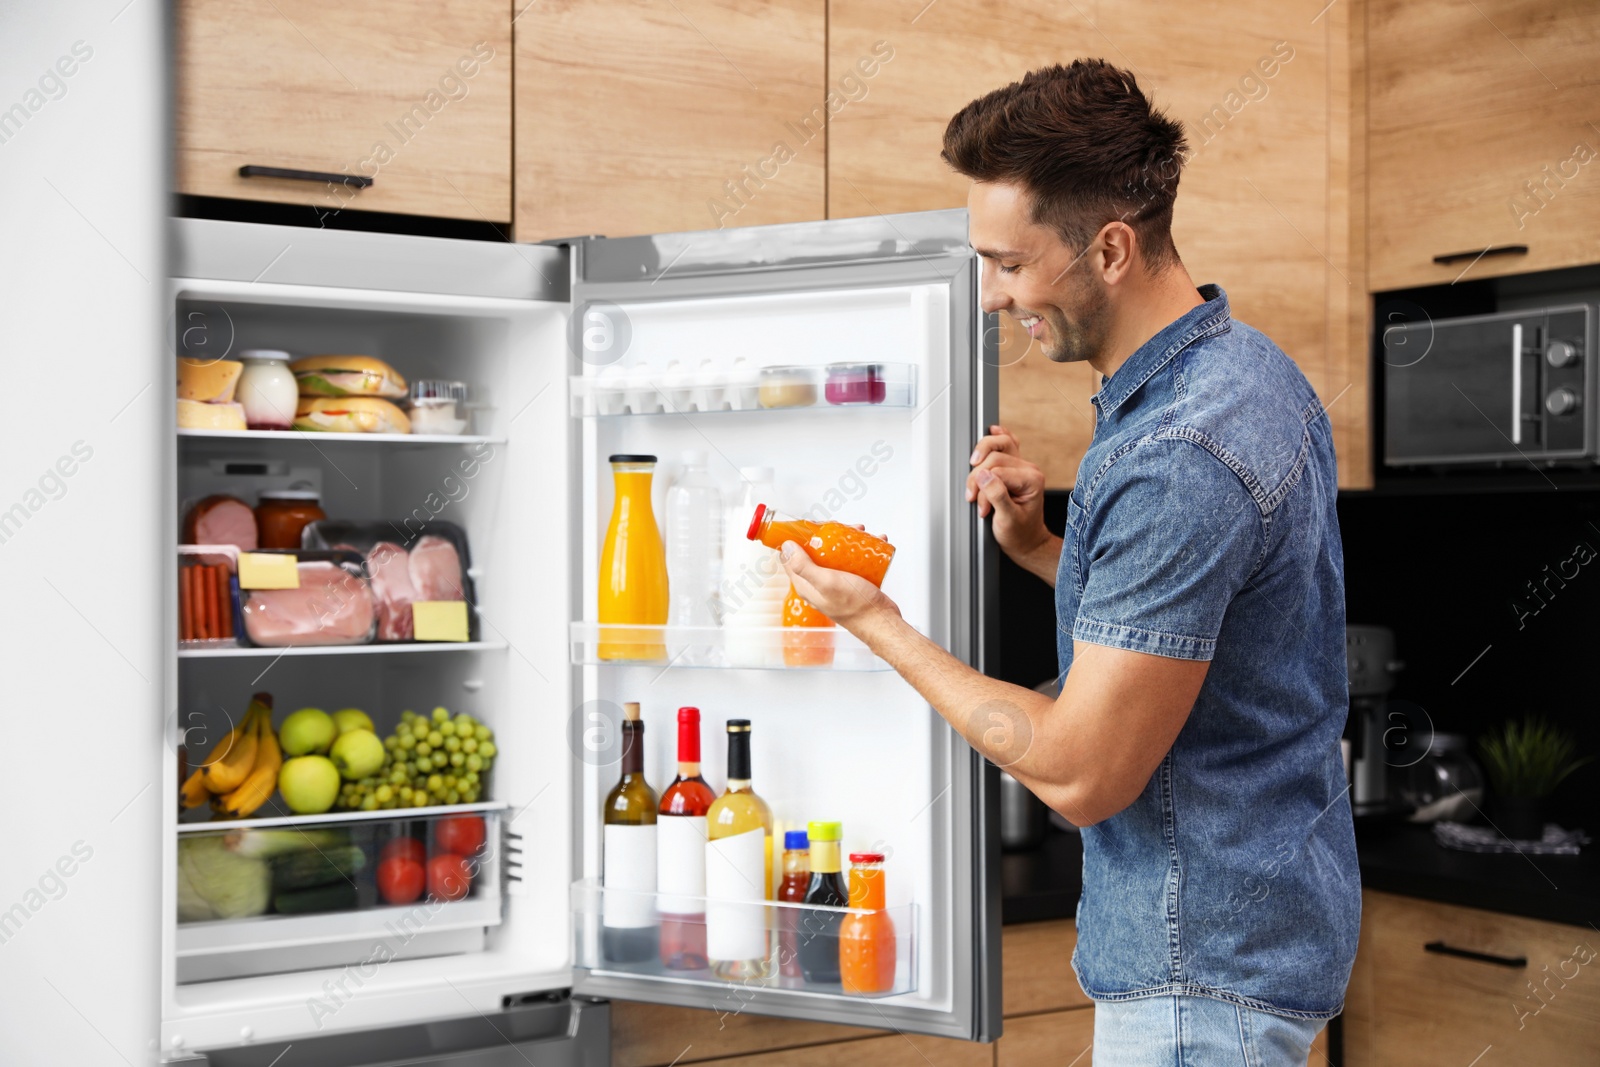 Photo of Man taking bottle with juice out of refrigerator in kitchen